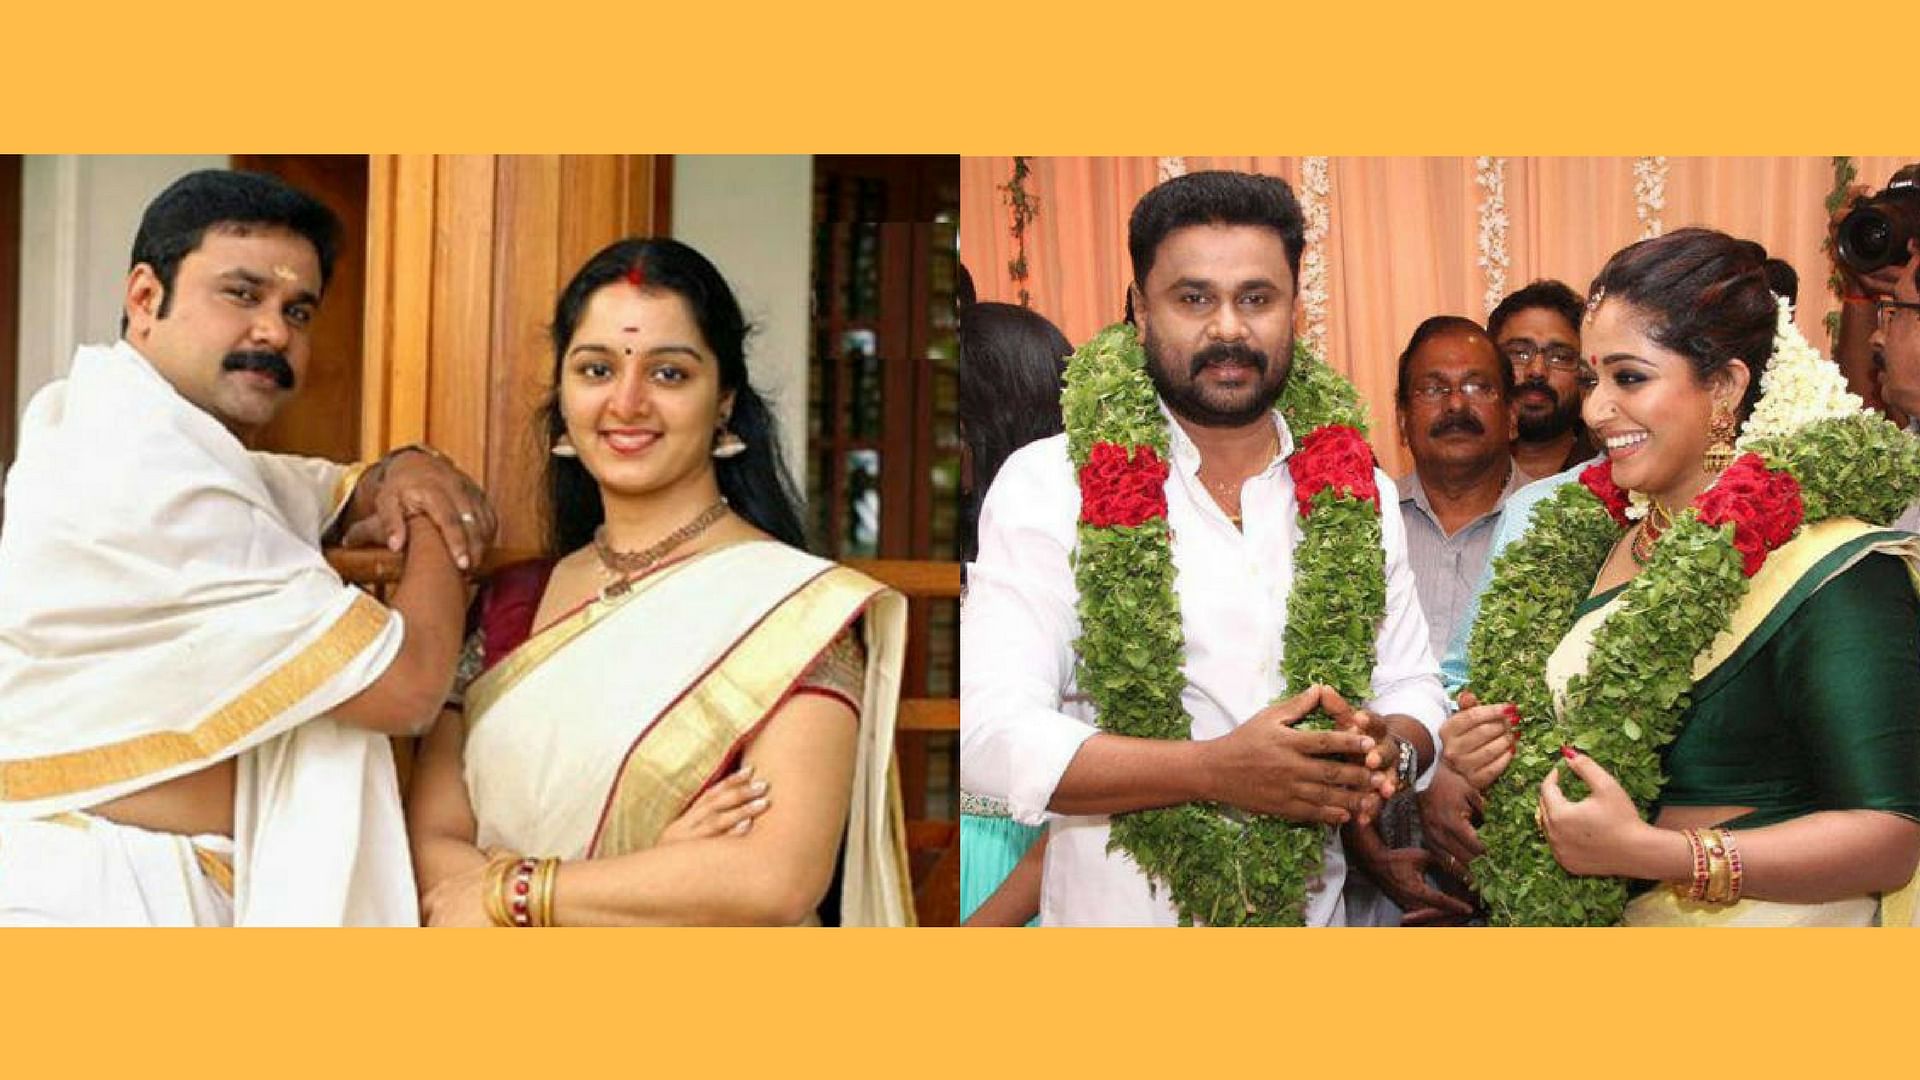 Dileep with Manju Warrier (left panel), and with Kavya Madhavan (right panel).